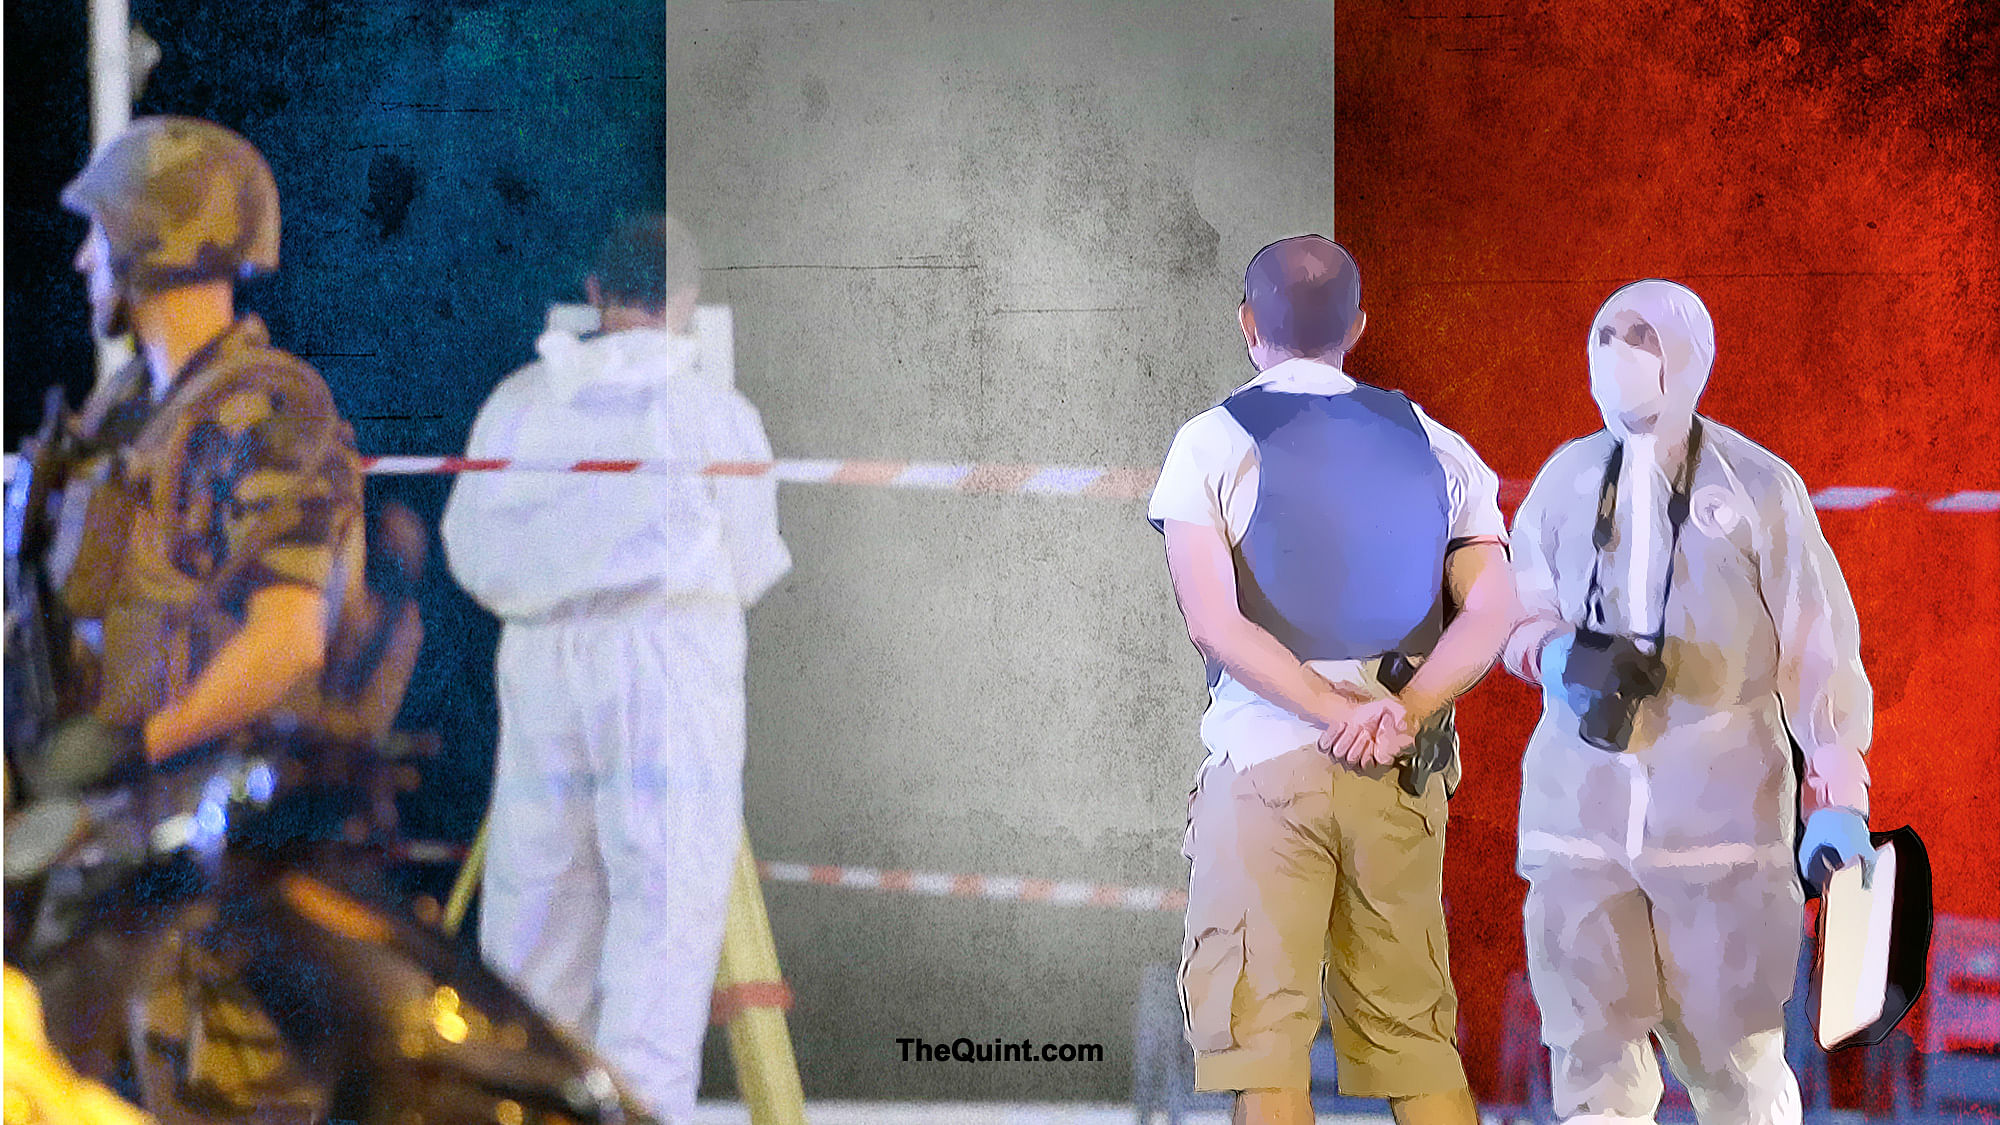 The truck driver, who rammed into the gathered crowd at France’s Bastille Day celebrations, was killed by police forces after an exchange of bullets. (Photo: <b>The Quint</b>) 